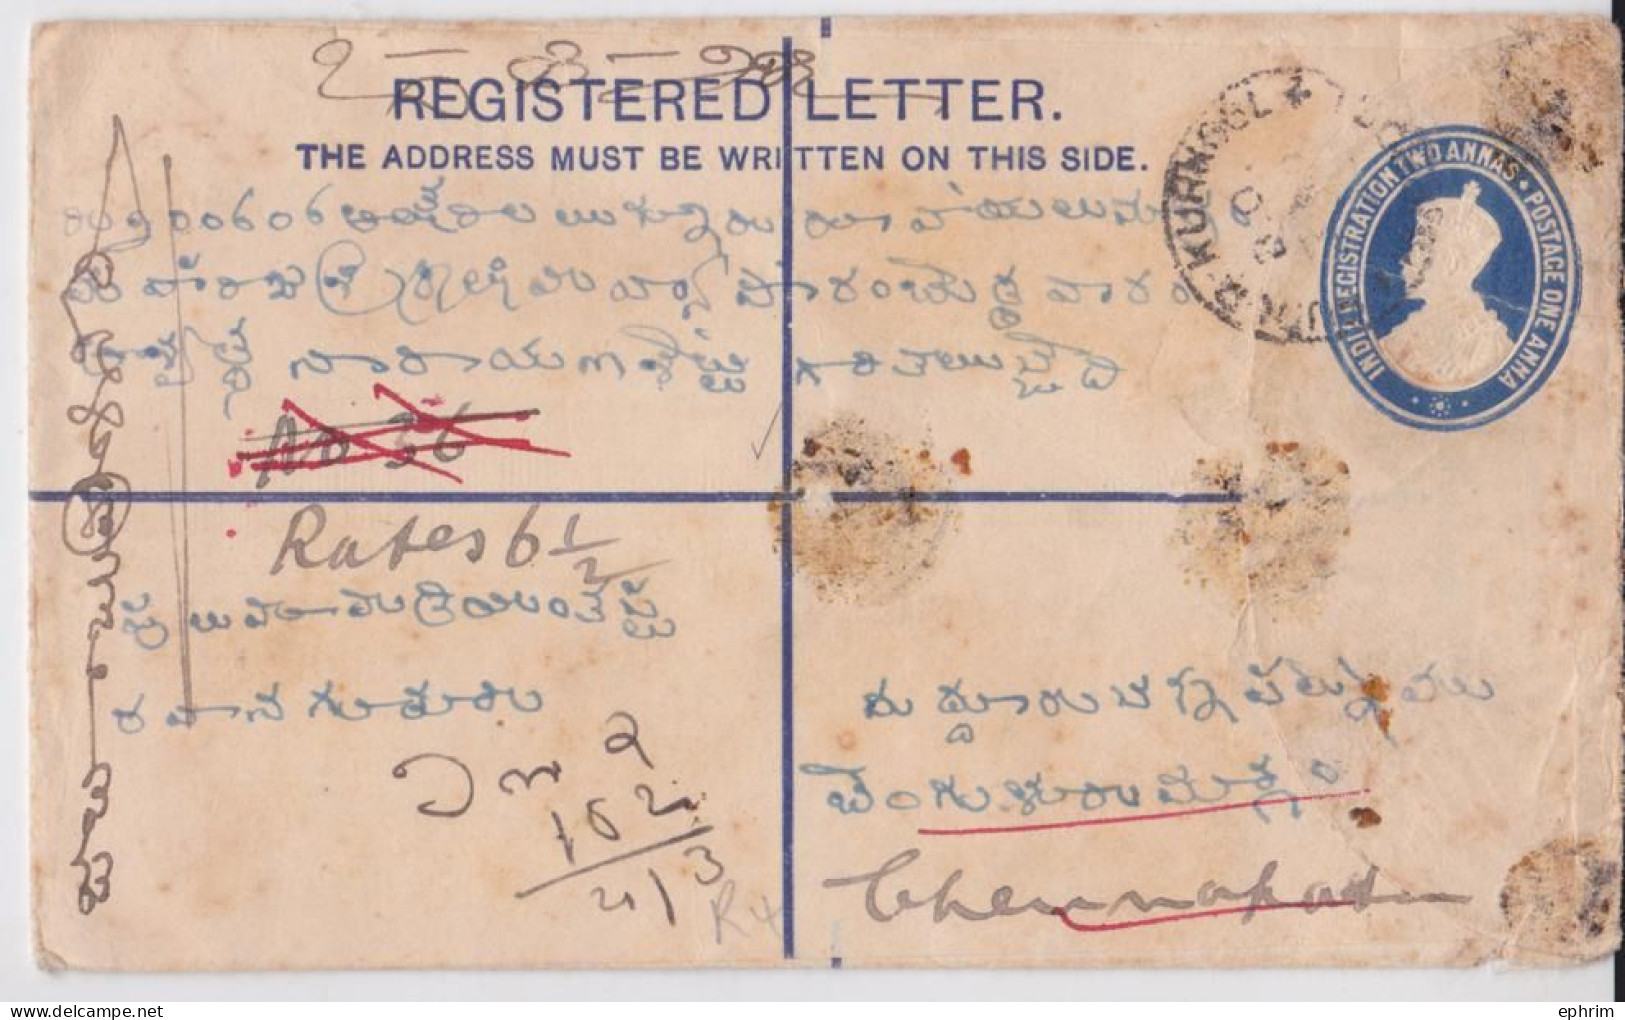 British India Raj Kurnool Lettre Recommandée Timbre King George Stamp Registered Mail Cover To Channapatna 1925 - 1911-35 King George V